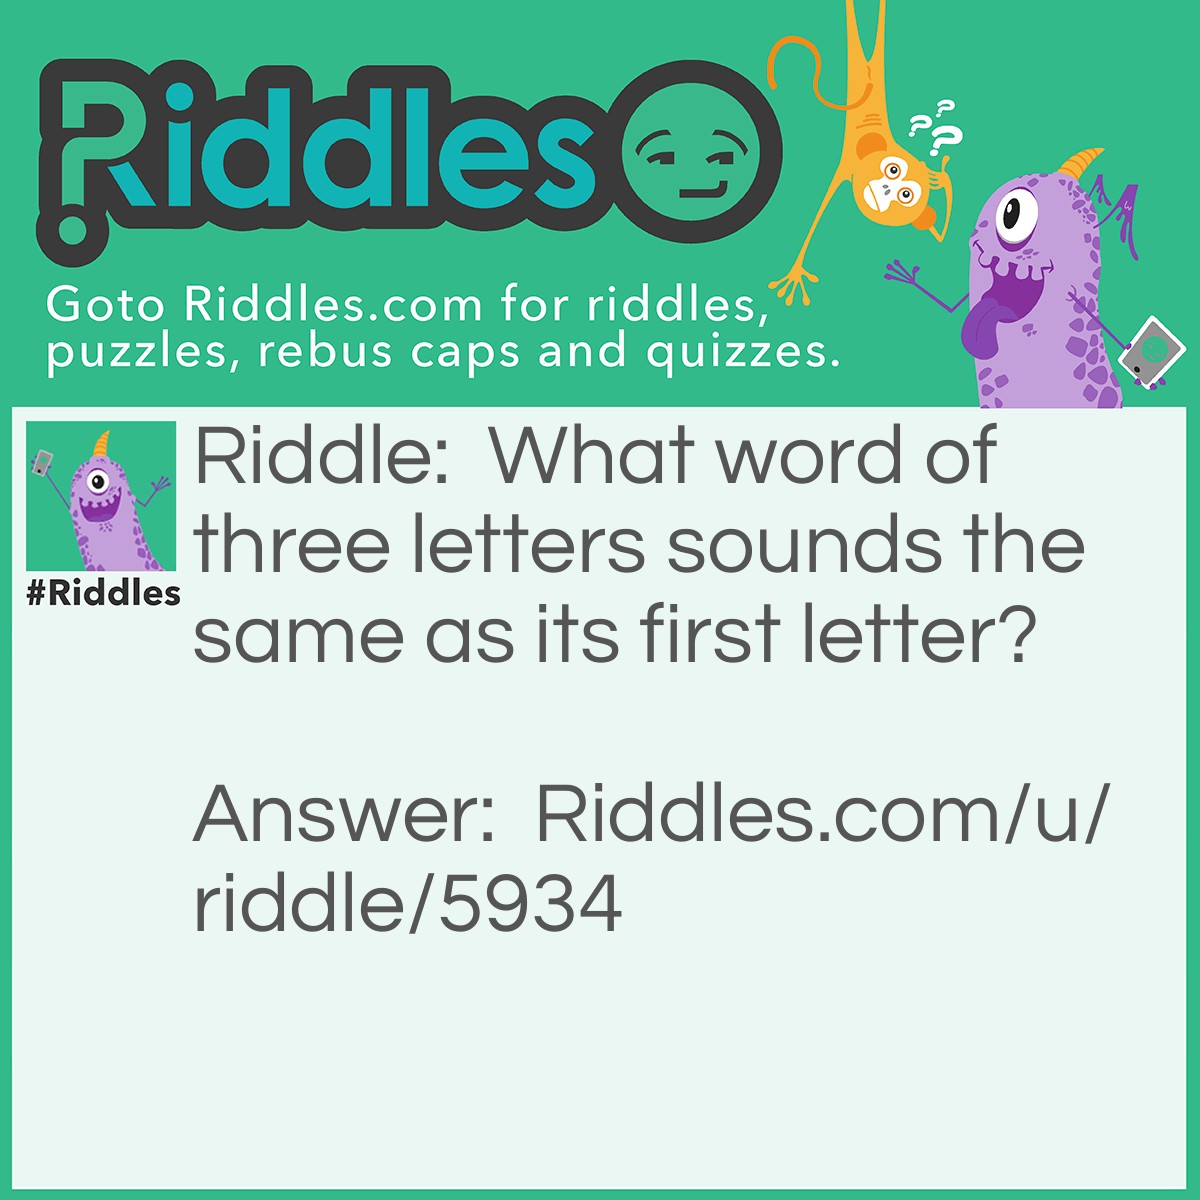 Riddle: What word of three letters sounds the same as its first letter? Answer: Pea. Others may be accepted.